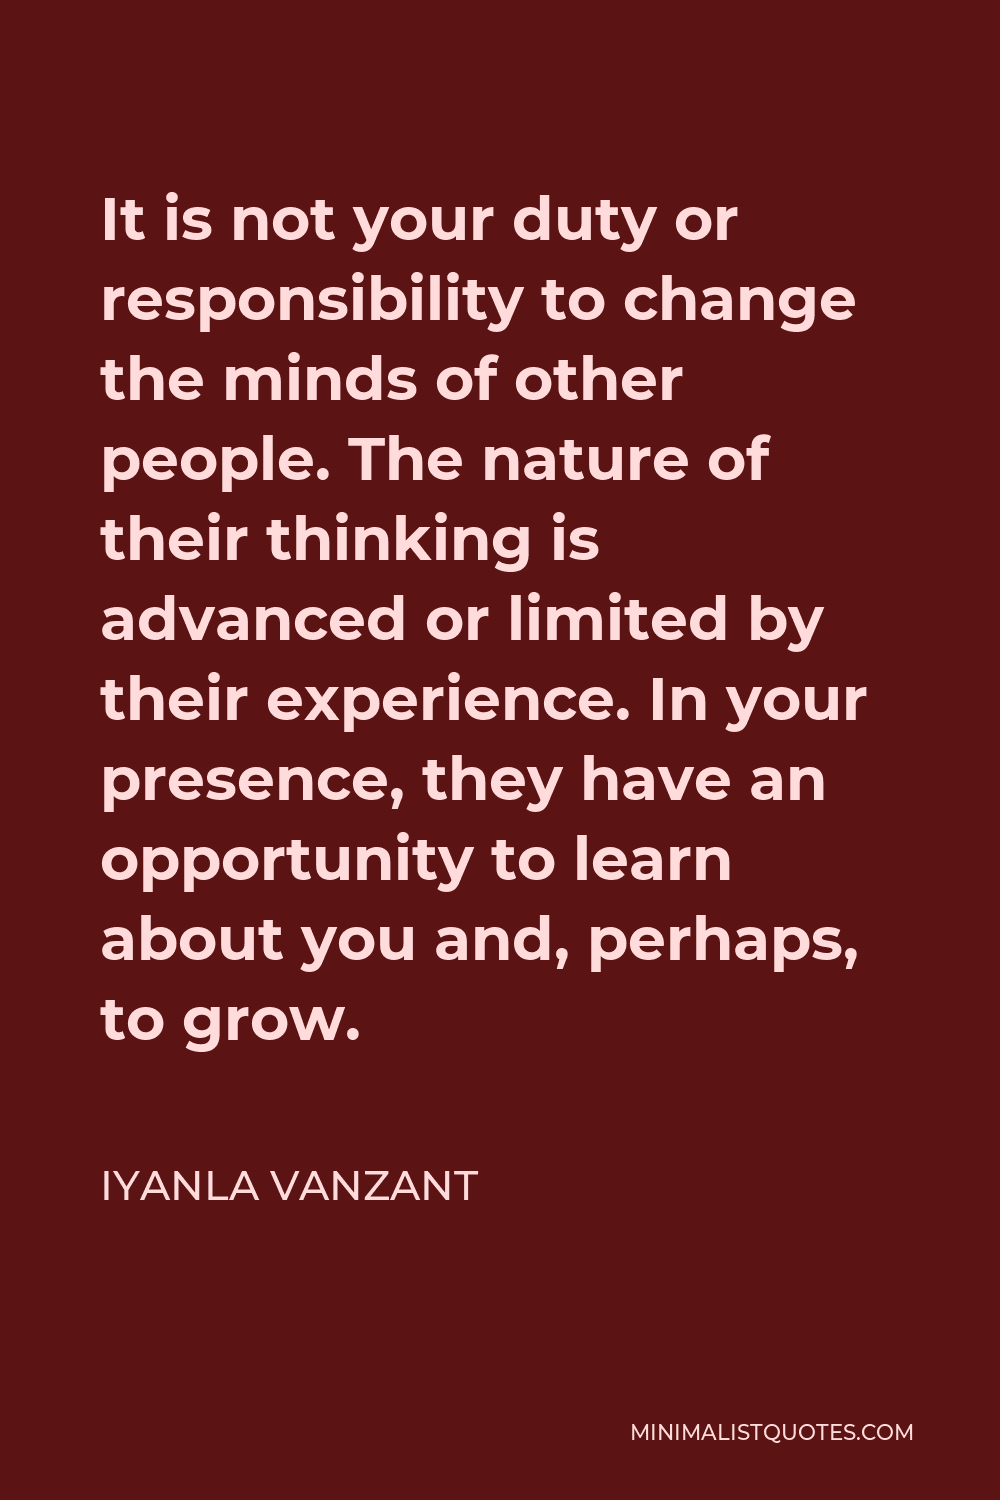 Iyanla Vanzant Quote - It is not your duty or responsibility to change the minds of other people. The nature of their thinking is advanced or limited by their experience. In your presence, they have an opportunity to learn about you and, perhaps, to grow.